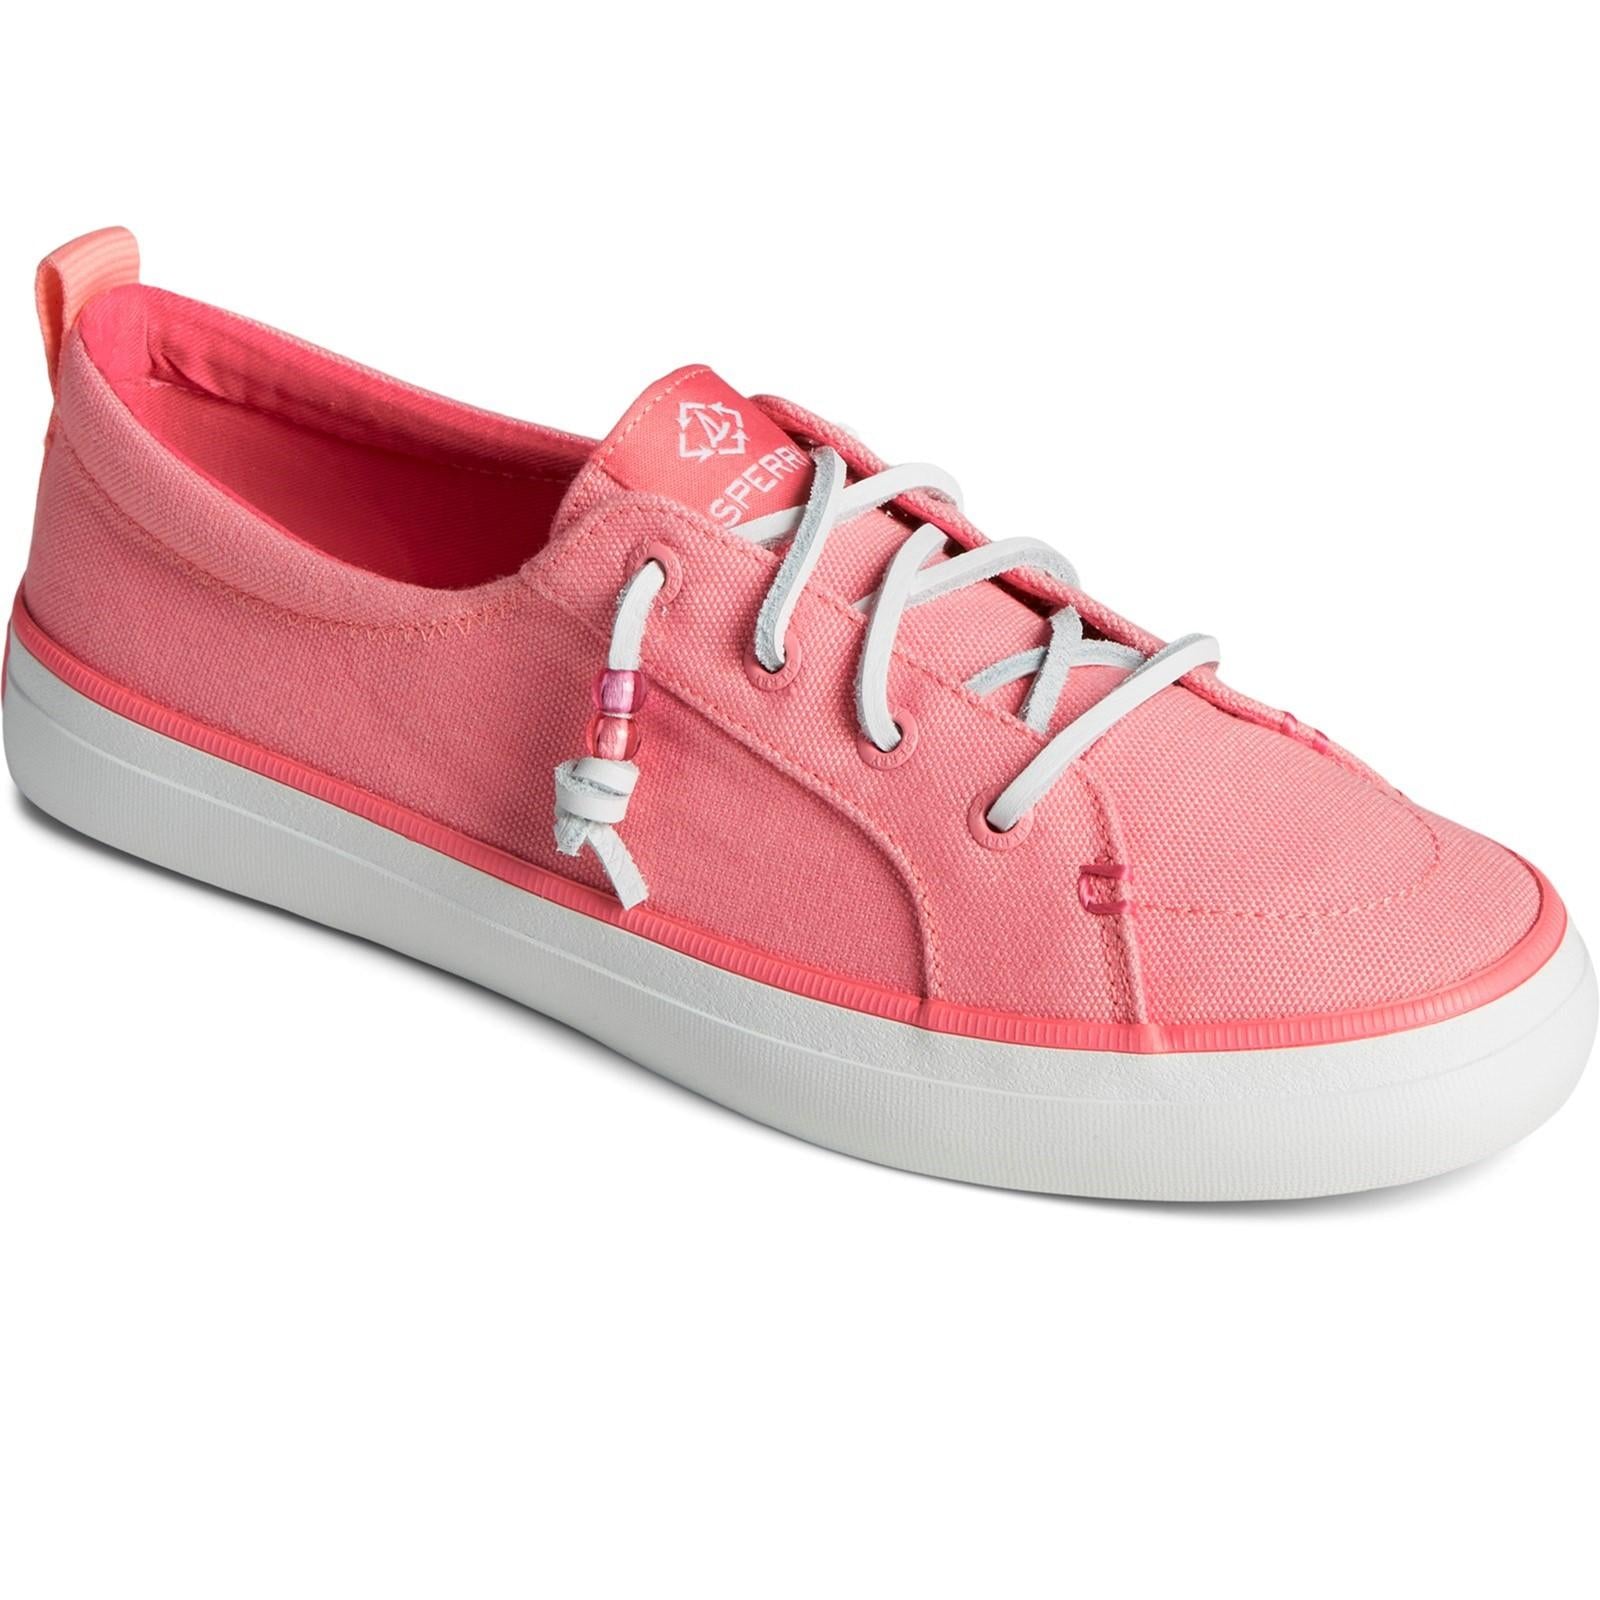 Sperry Top-sider Crest Vibe Shoes